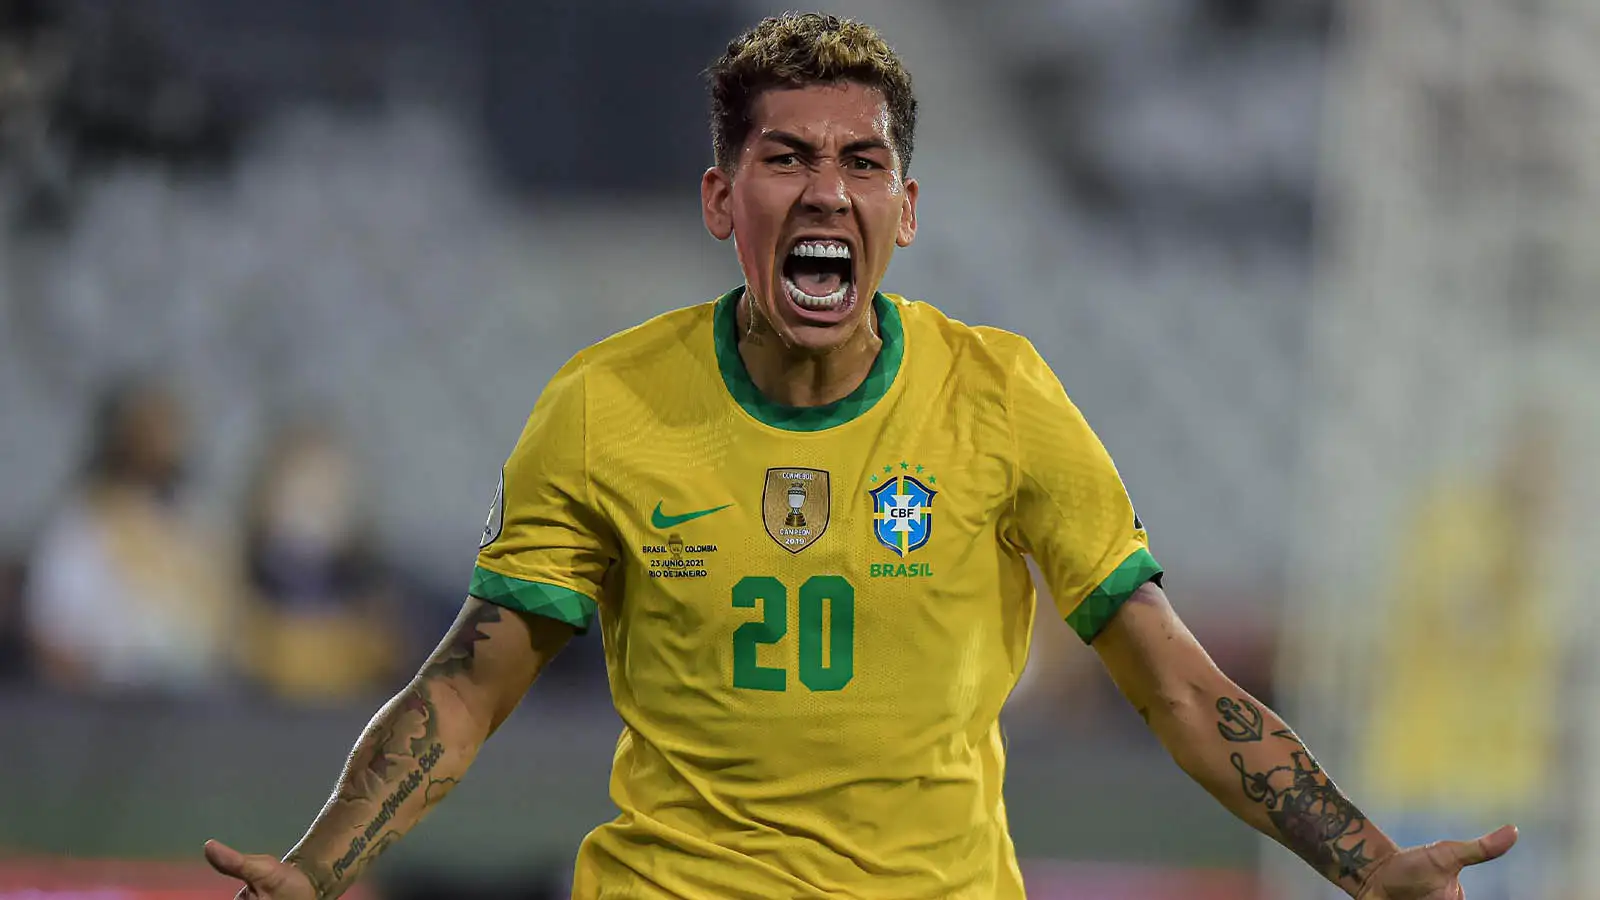 Roberto Firmino Brazil player celebrates his goal during the Group B match between Brazil and Colombia